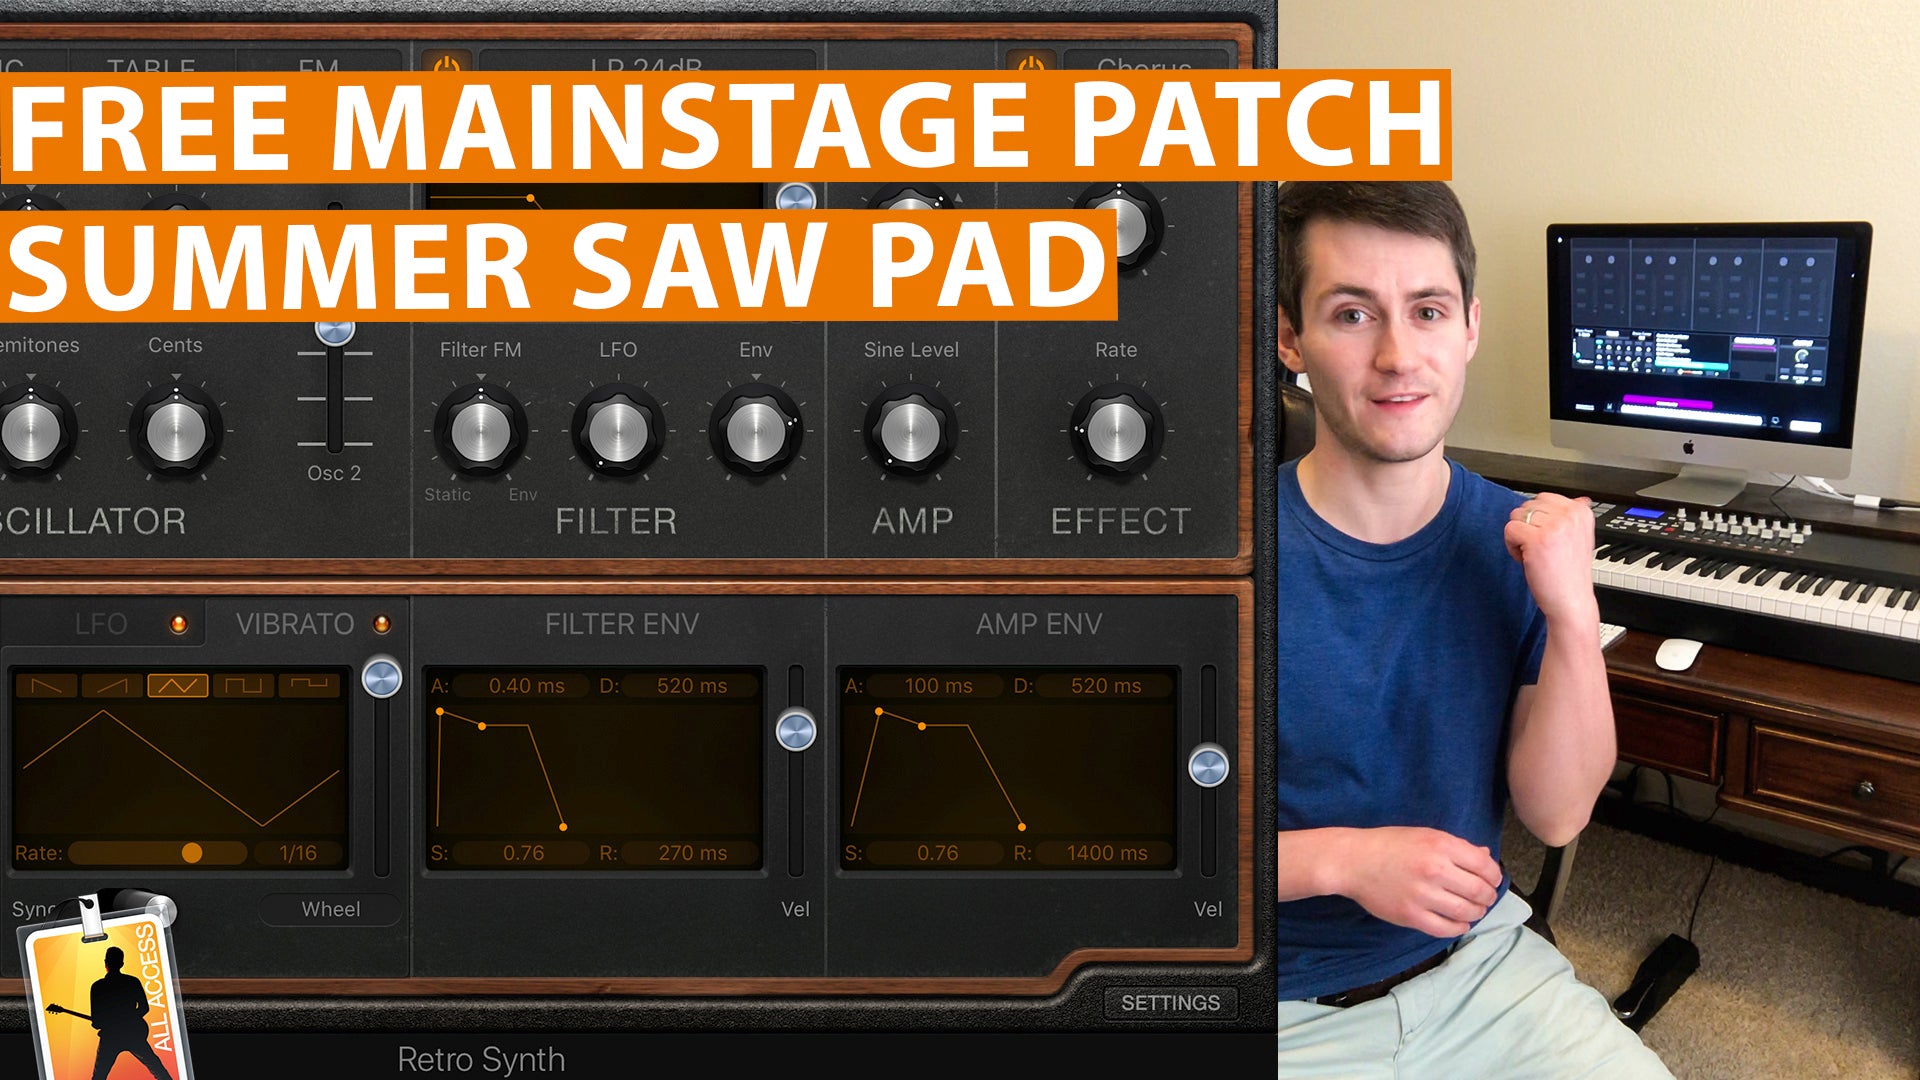 Free MainStage Worship Patch! - Summer Saw Pad